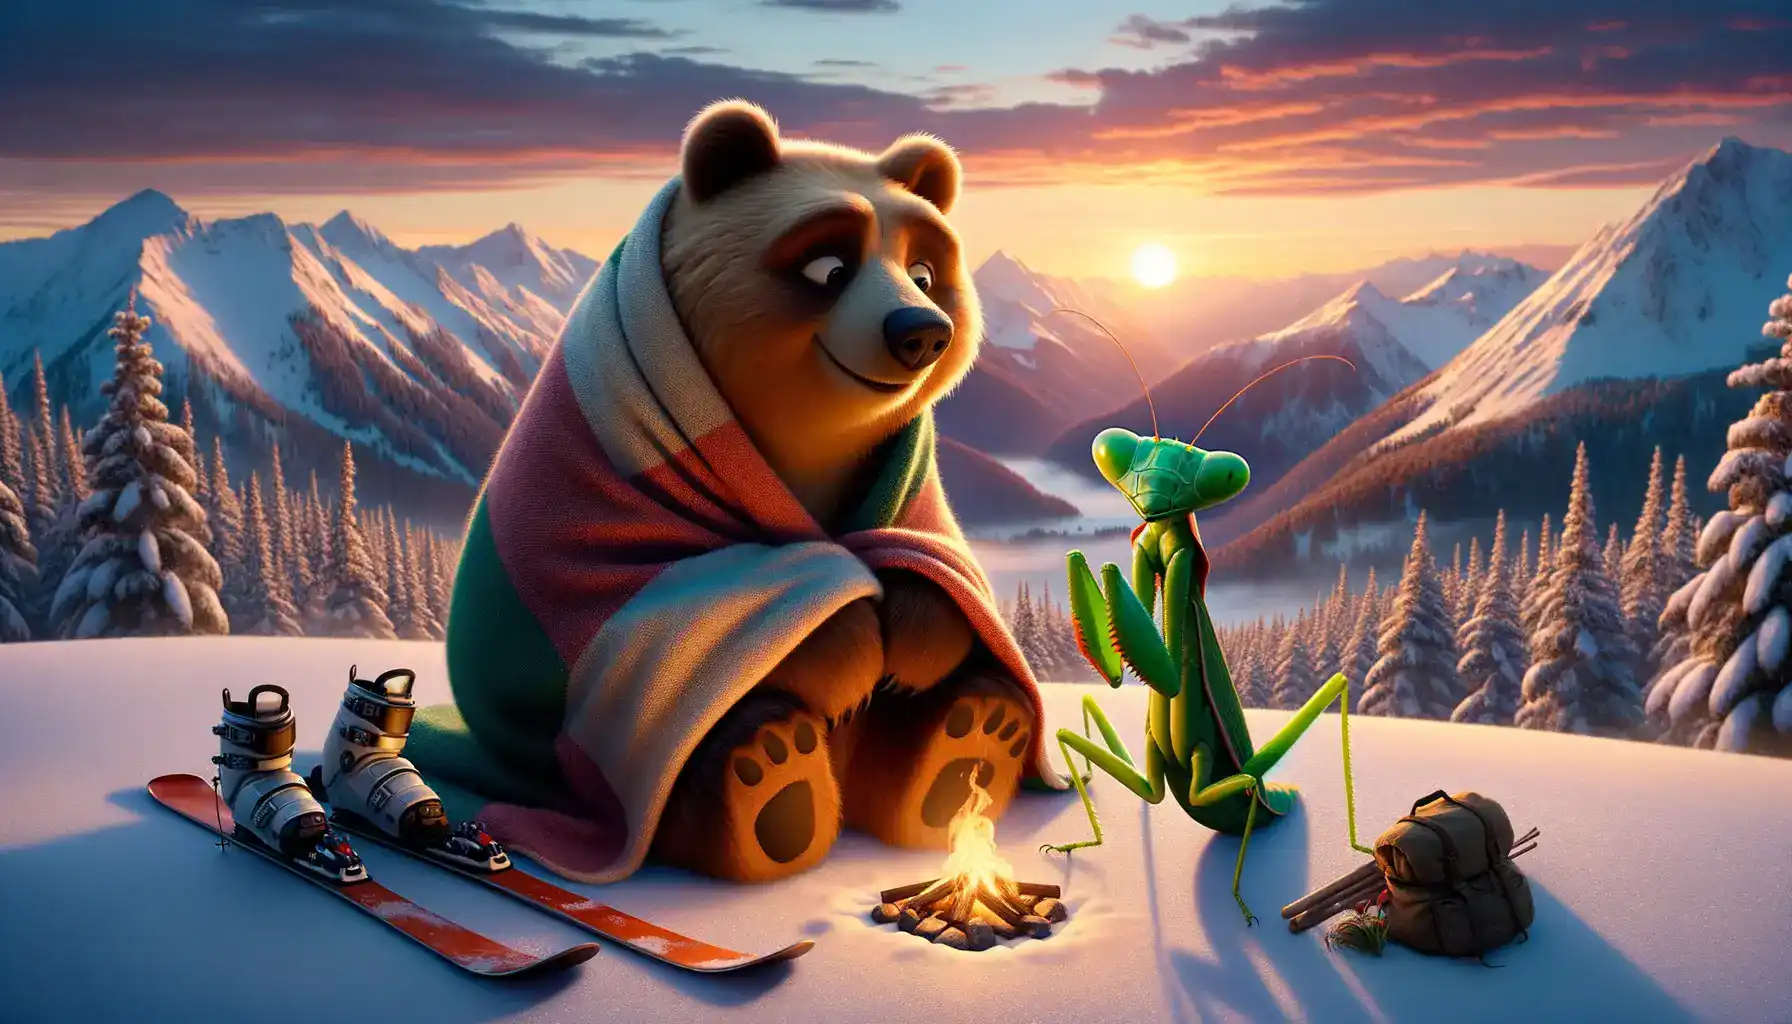 Bruno the bear wraps a warm blanket around himself and Maya the praying mantis, as they sit side by side, watching the sunset